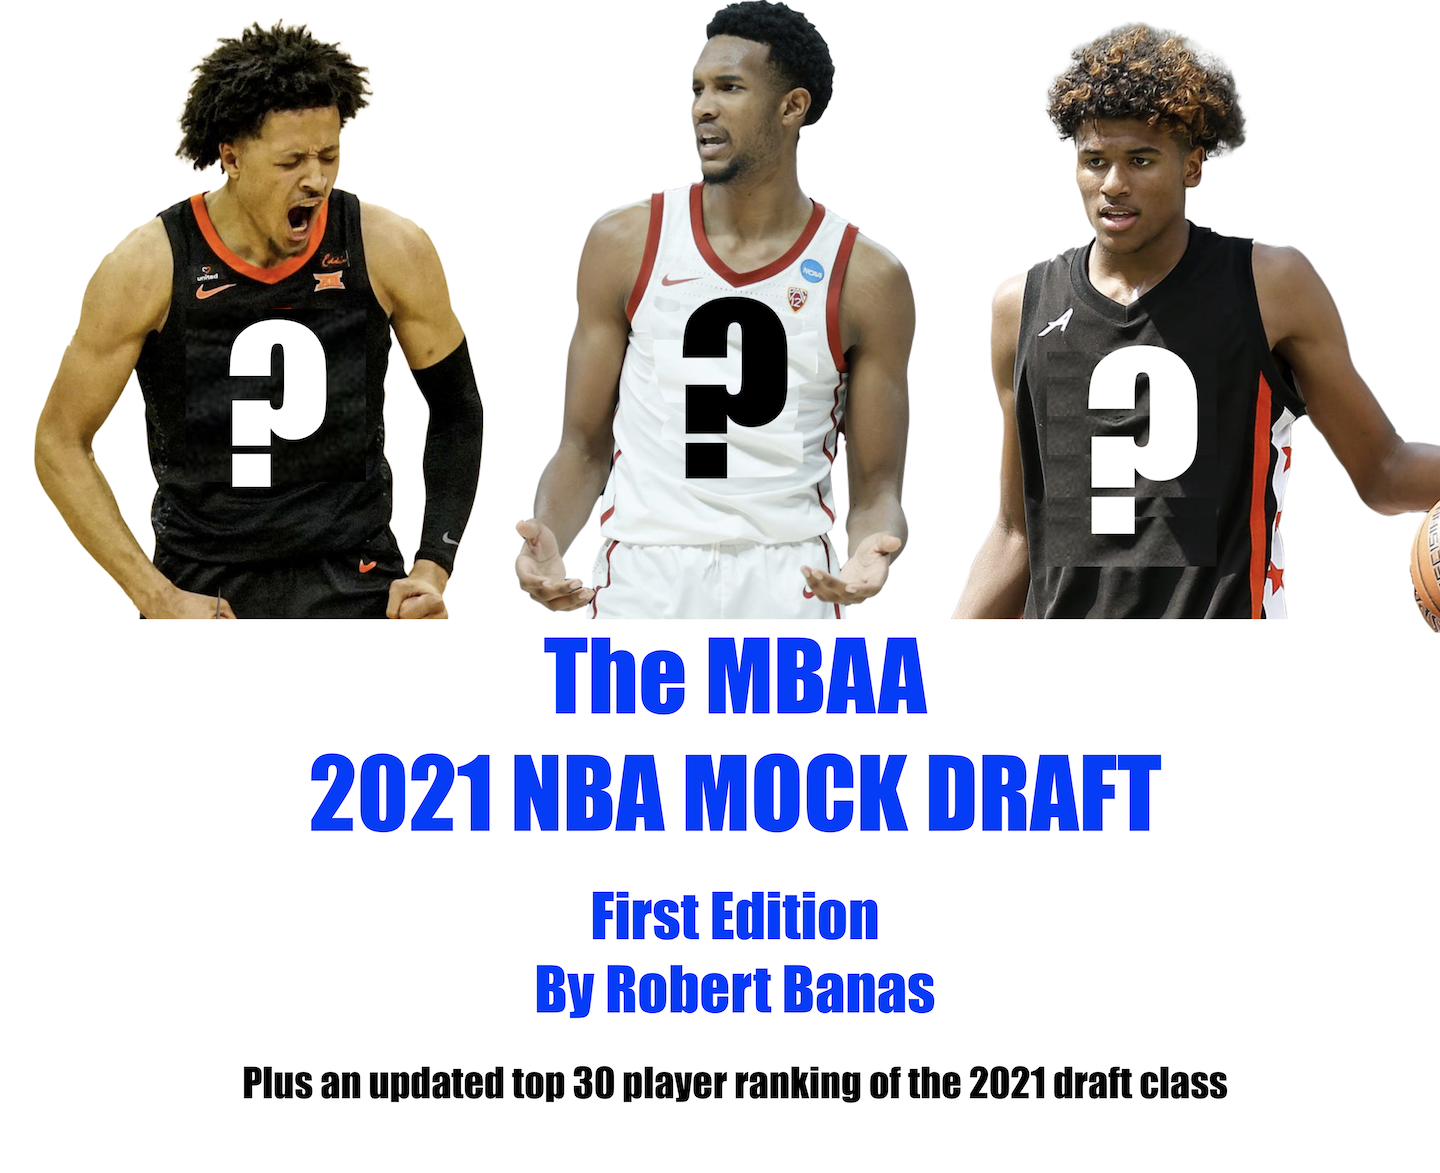 2021 NBA Mock Draft and Updated Top 30 Player Rankings